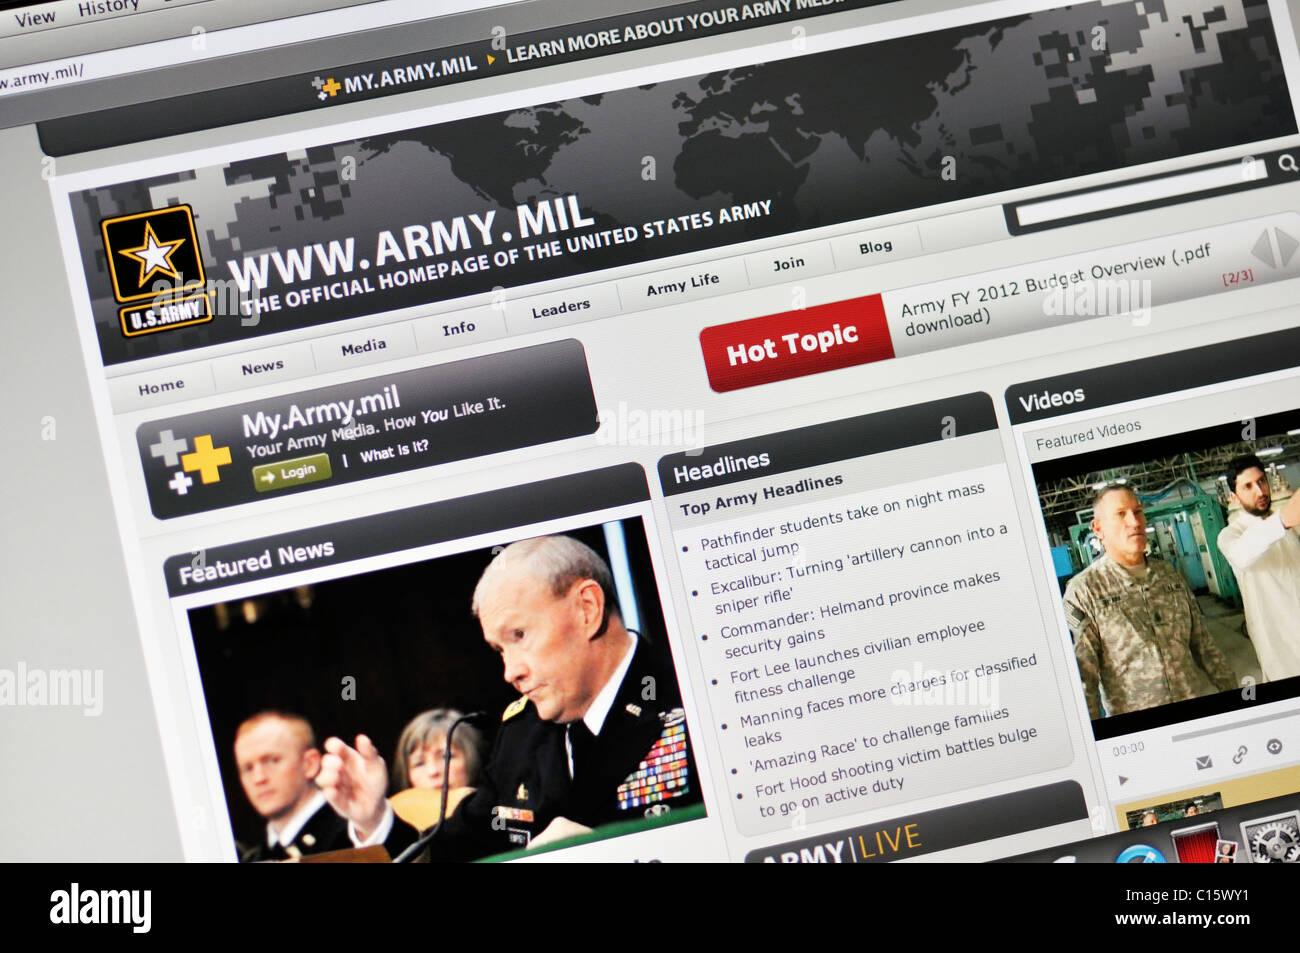 United States Army website Stock Photo